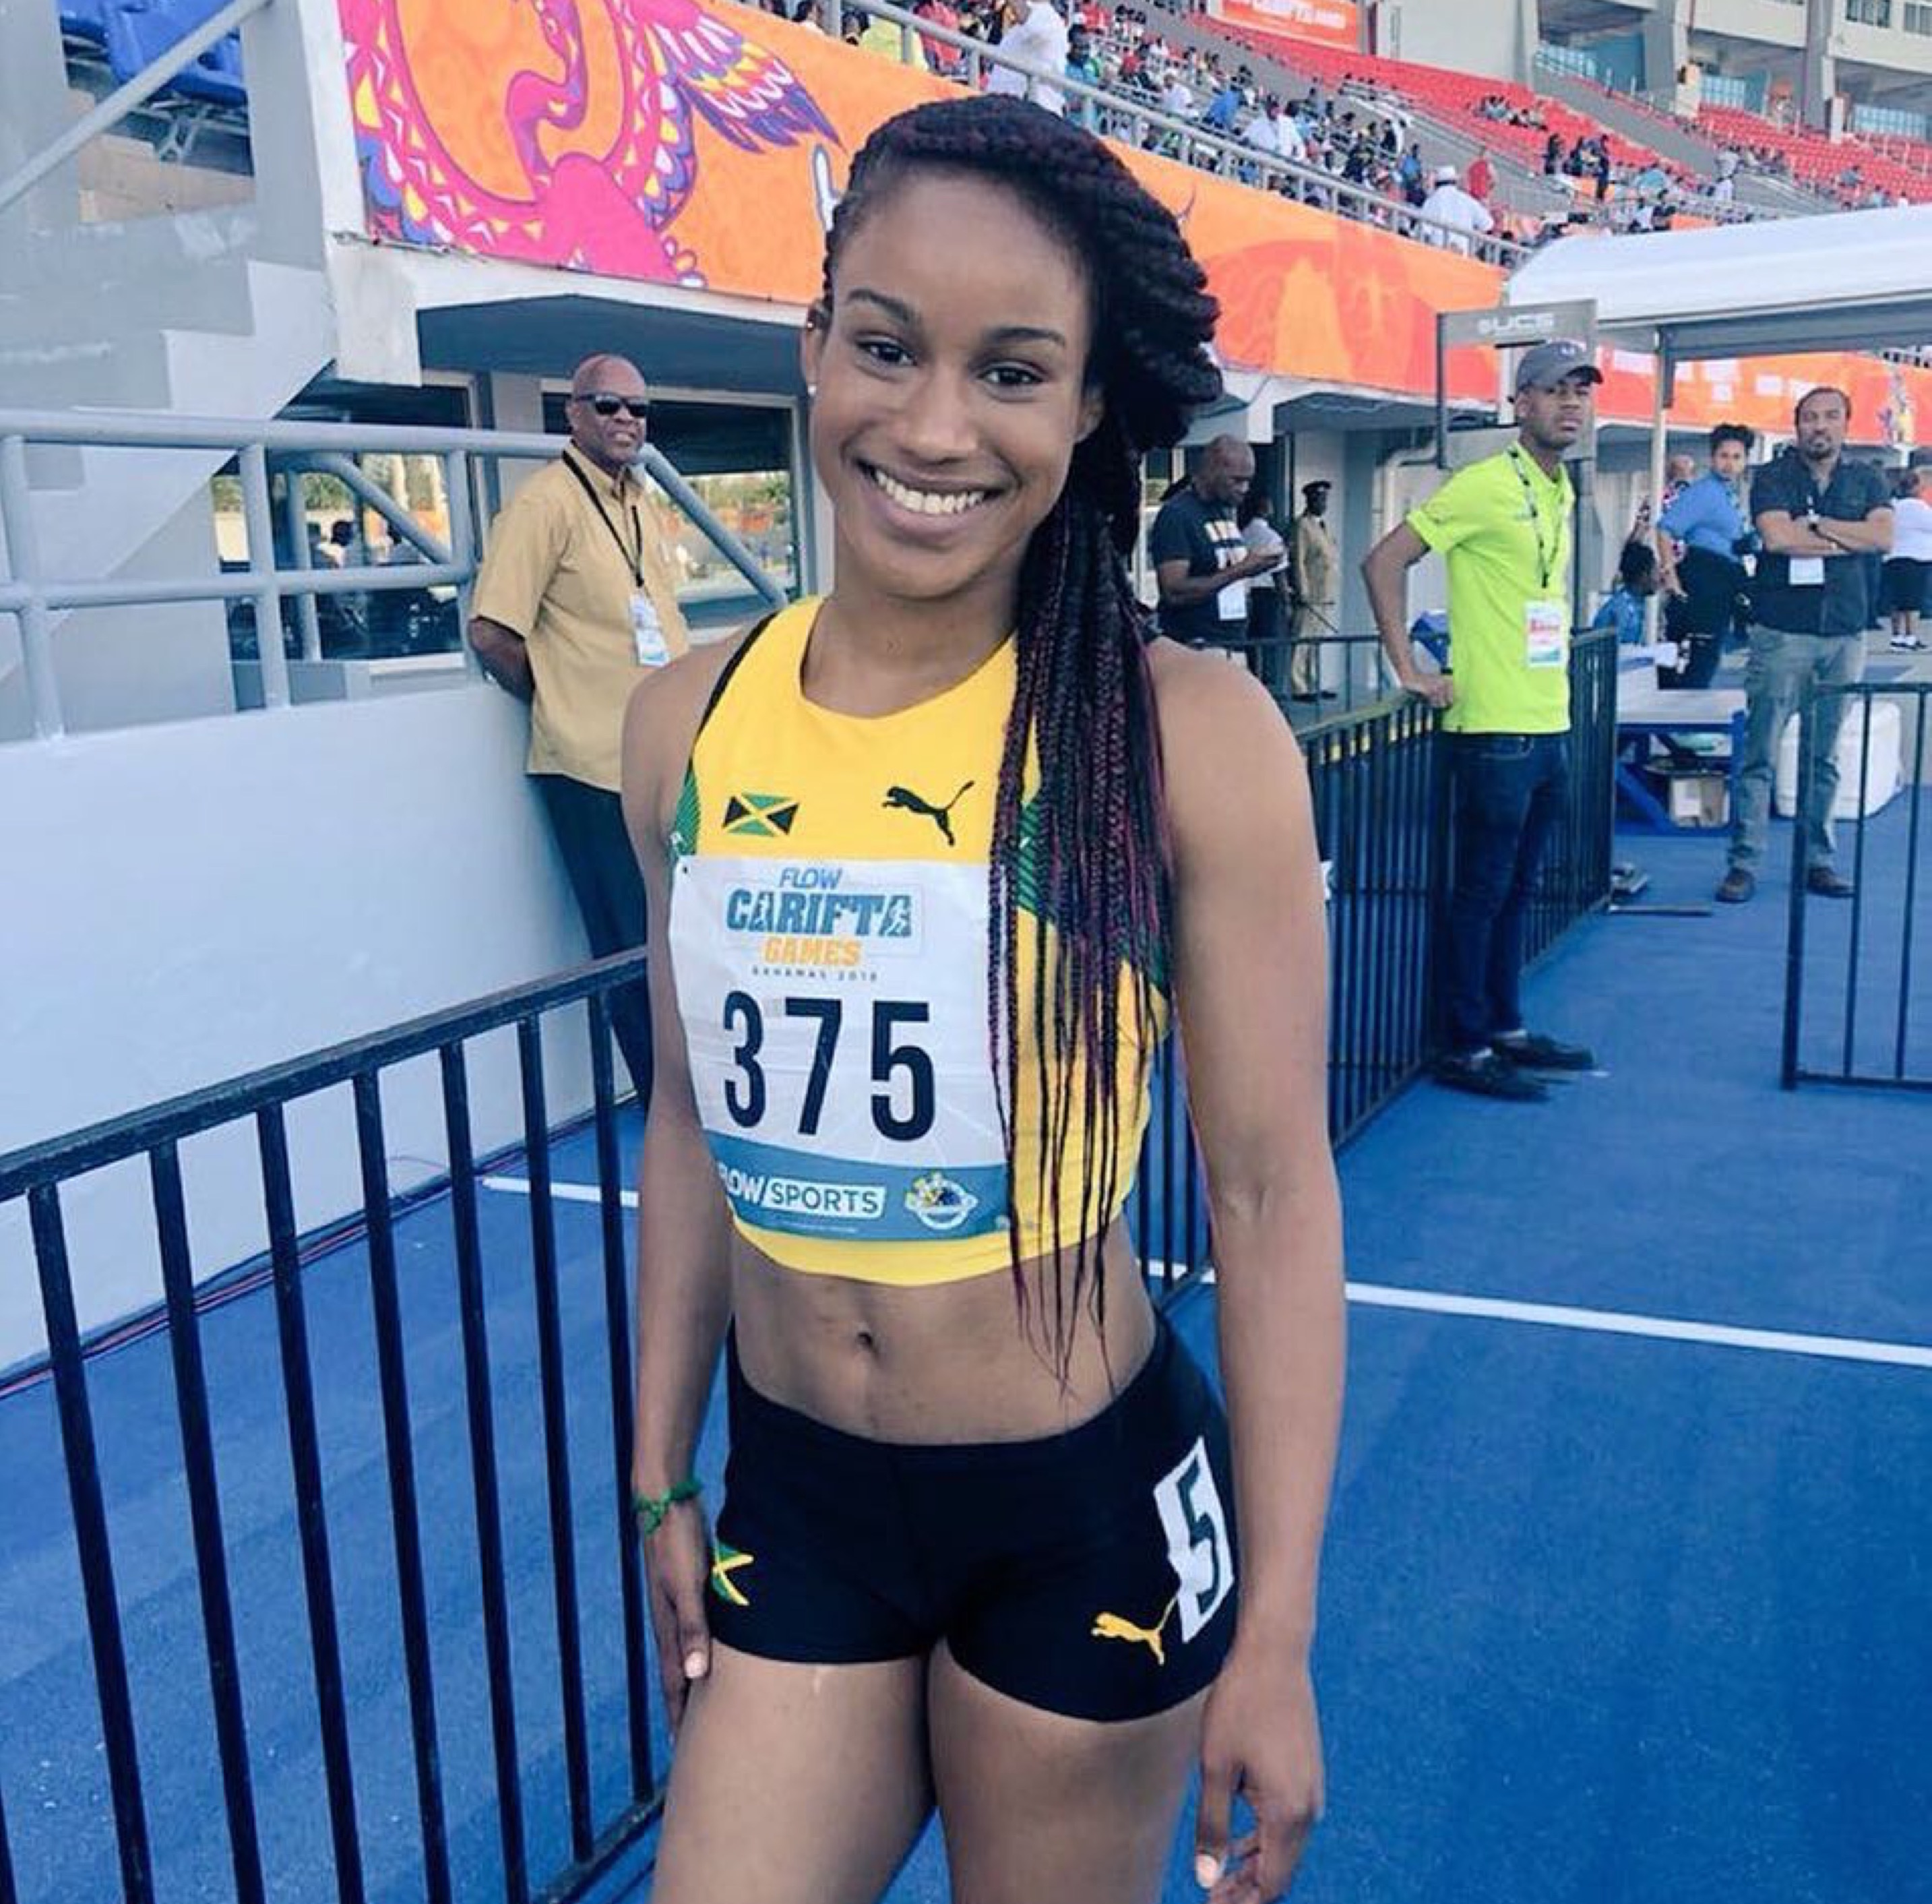 Briana Williams “Can’t Wait To Be In Doha” To Contest 100m.